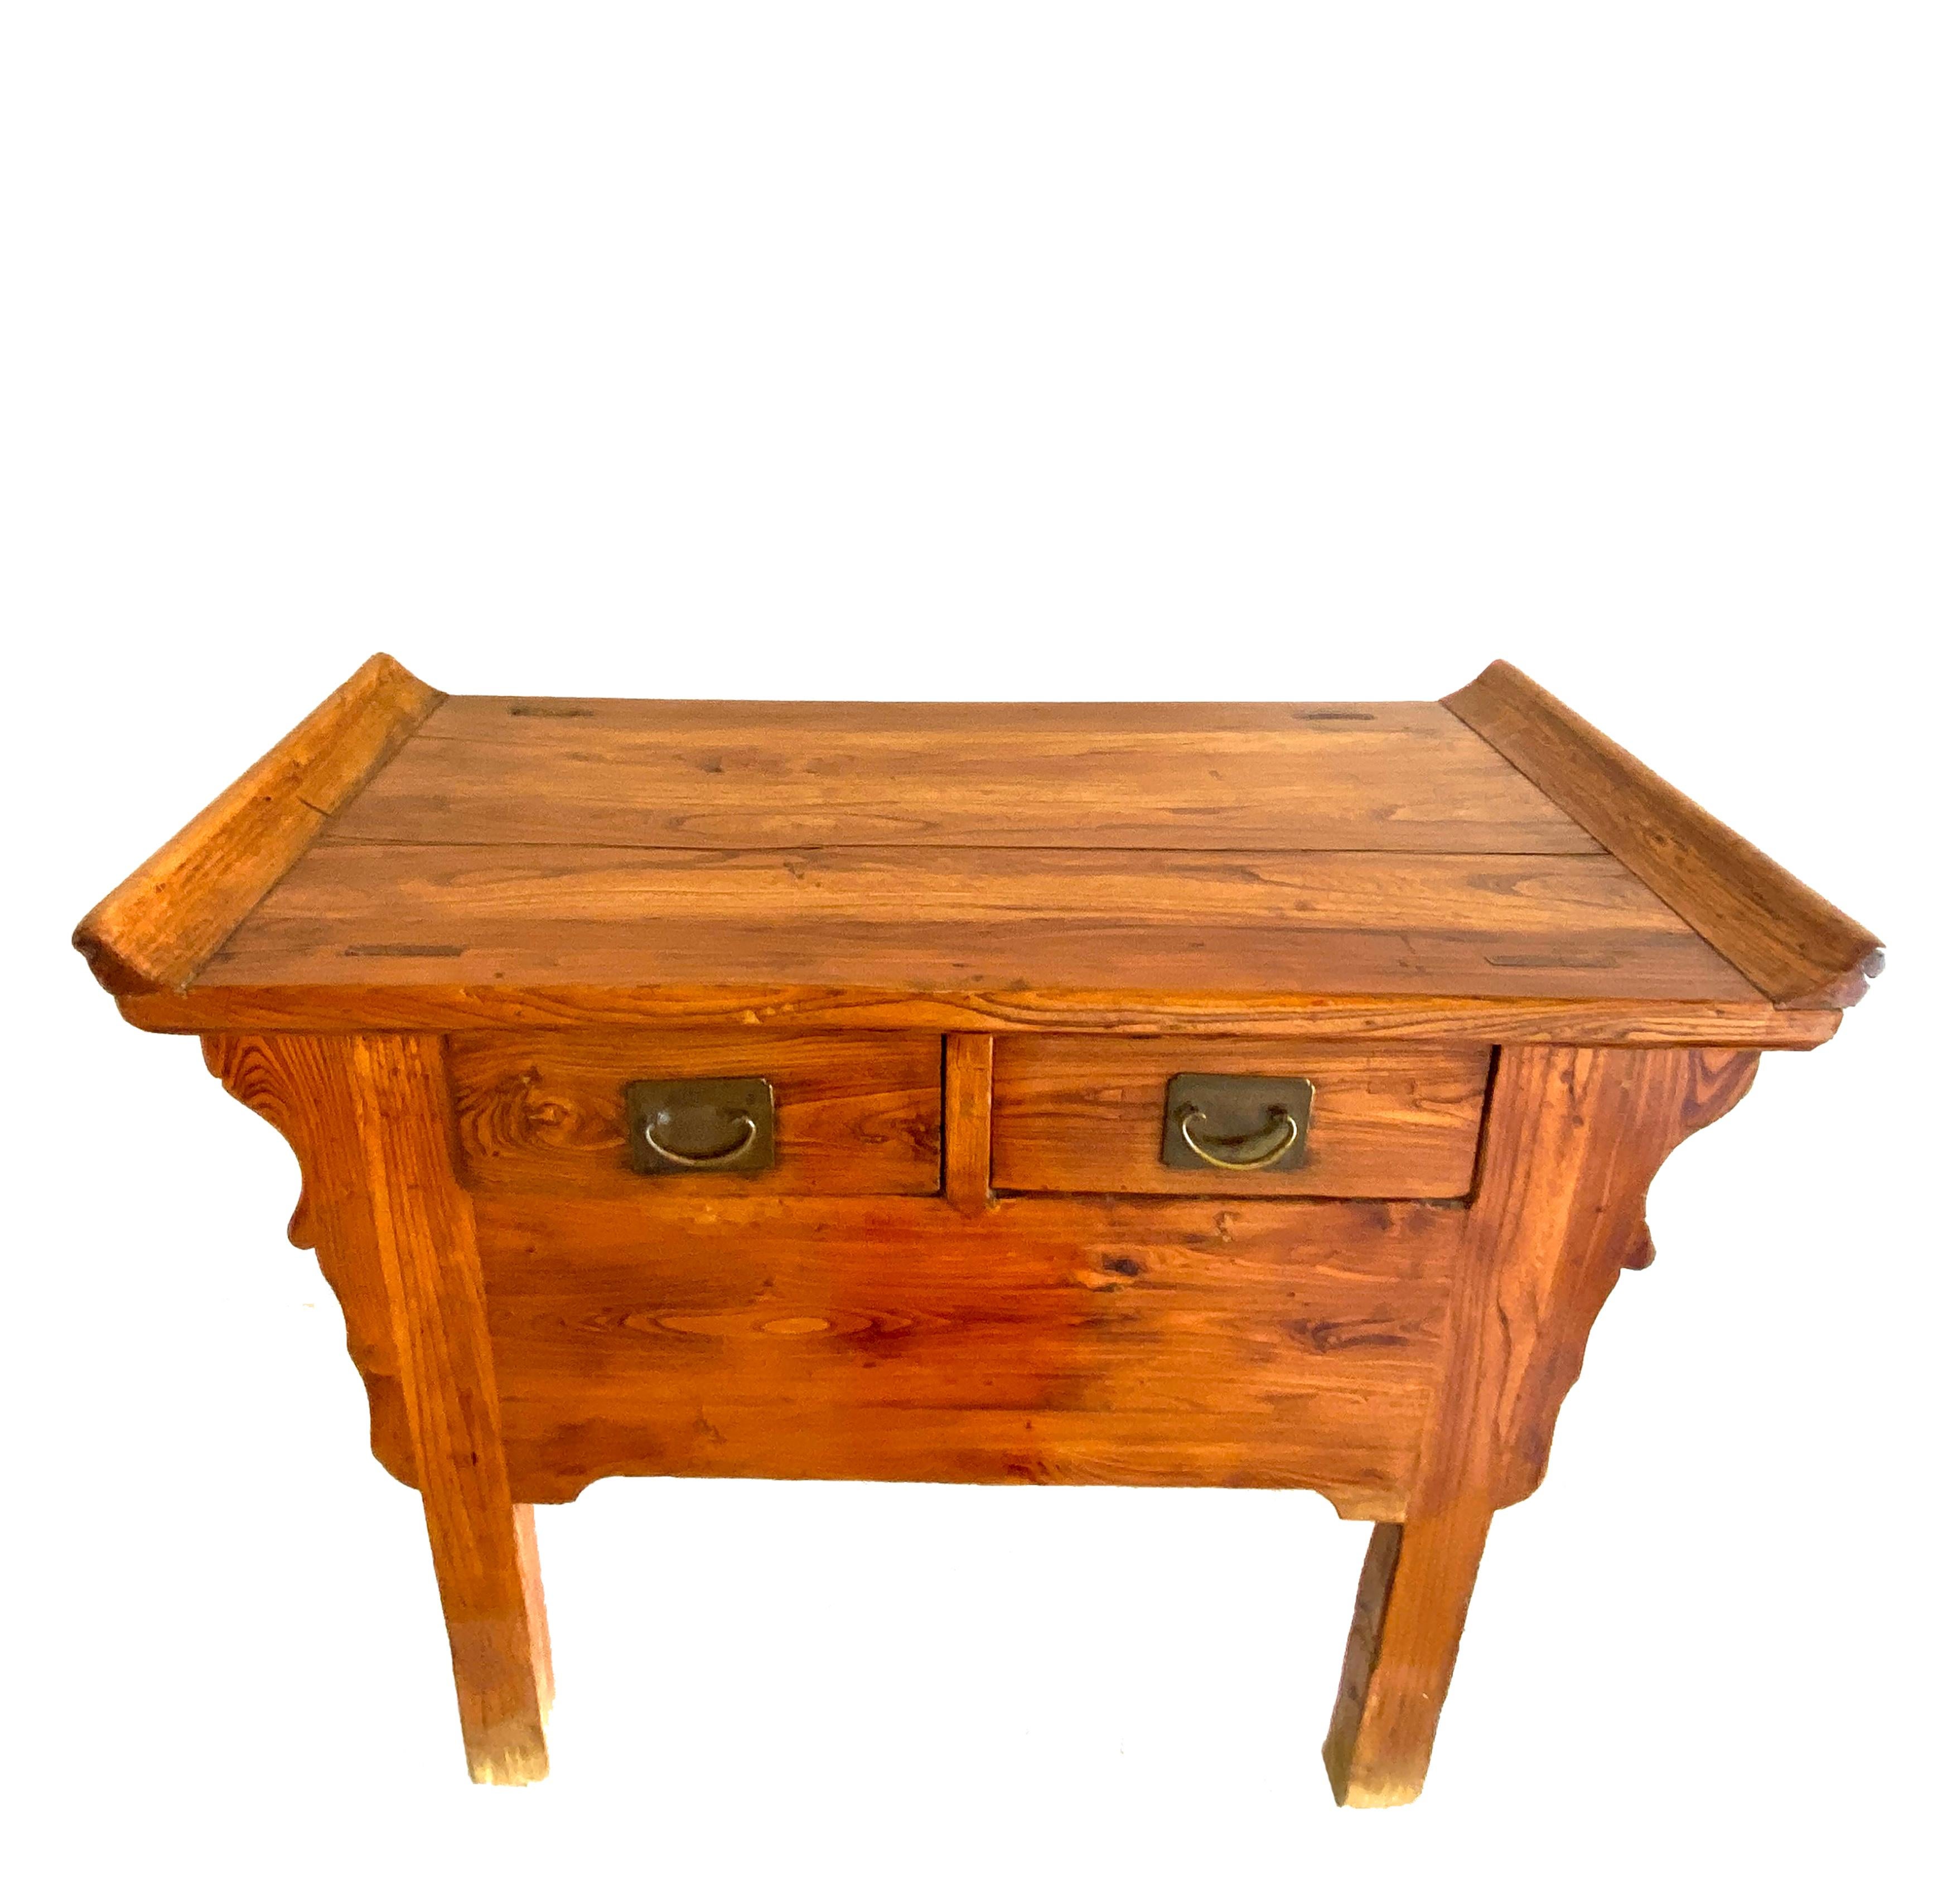 Here we are offering an antique Chinese beech hardwood double drawer carved coffer table. It's from late 19th to early 20th century. Although it has acceptable amount of normal wear and tear, it's still in good overall condition. Beautiful grain of